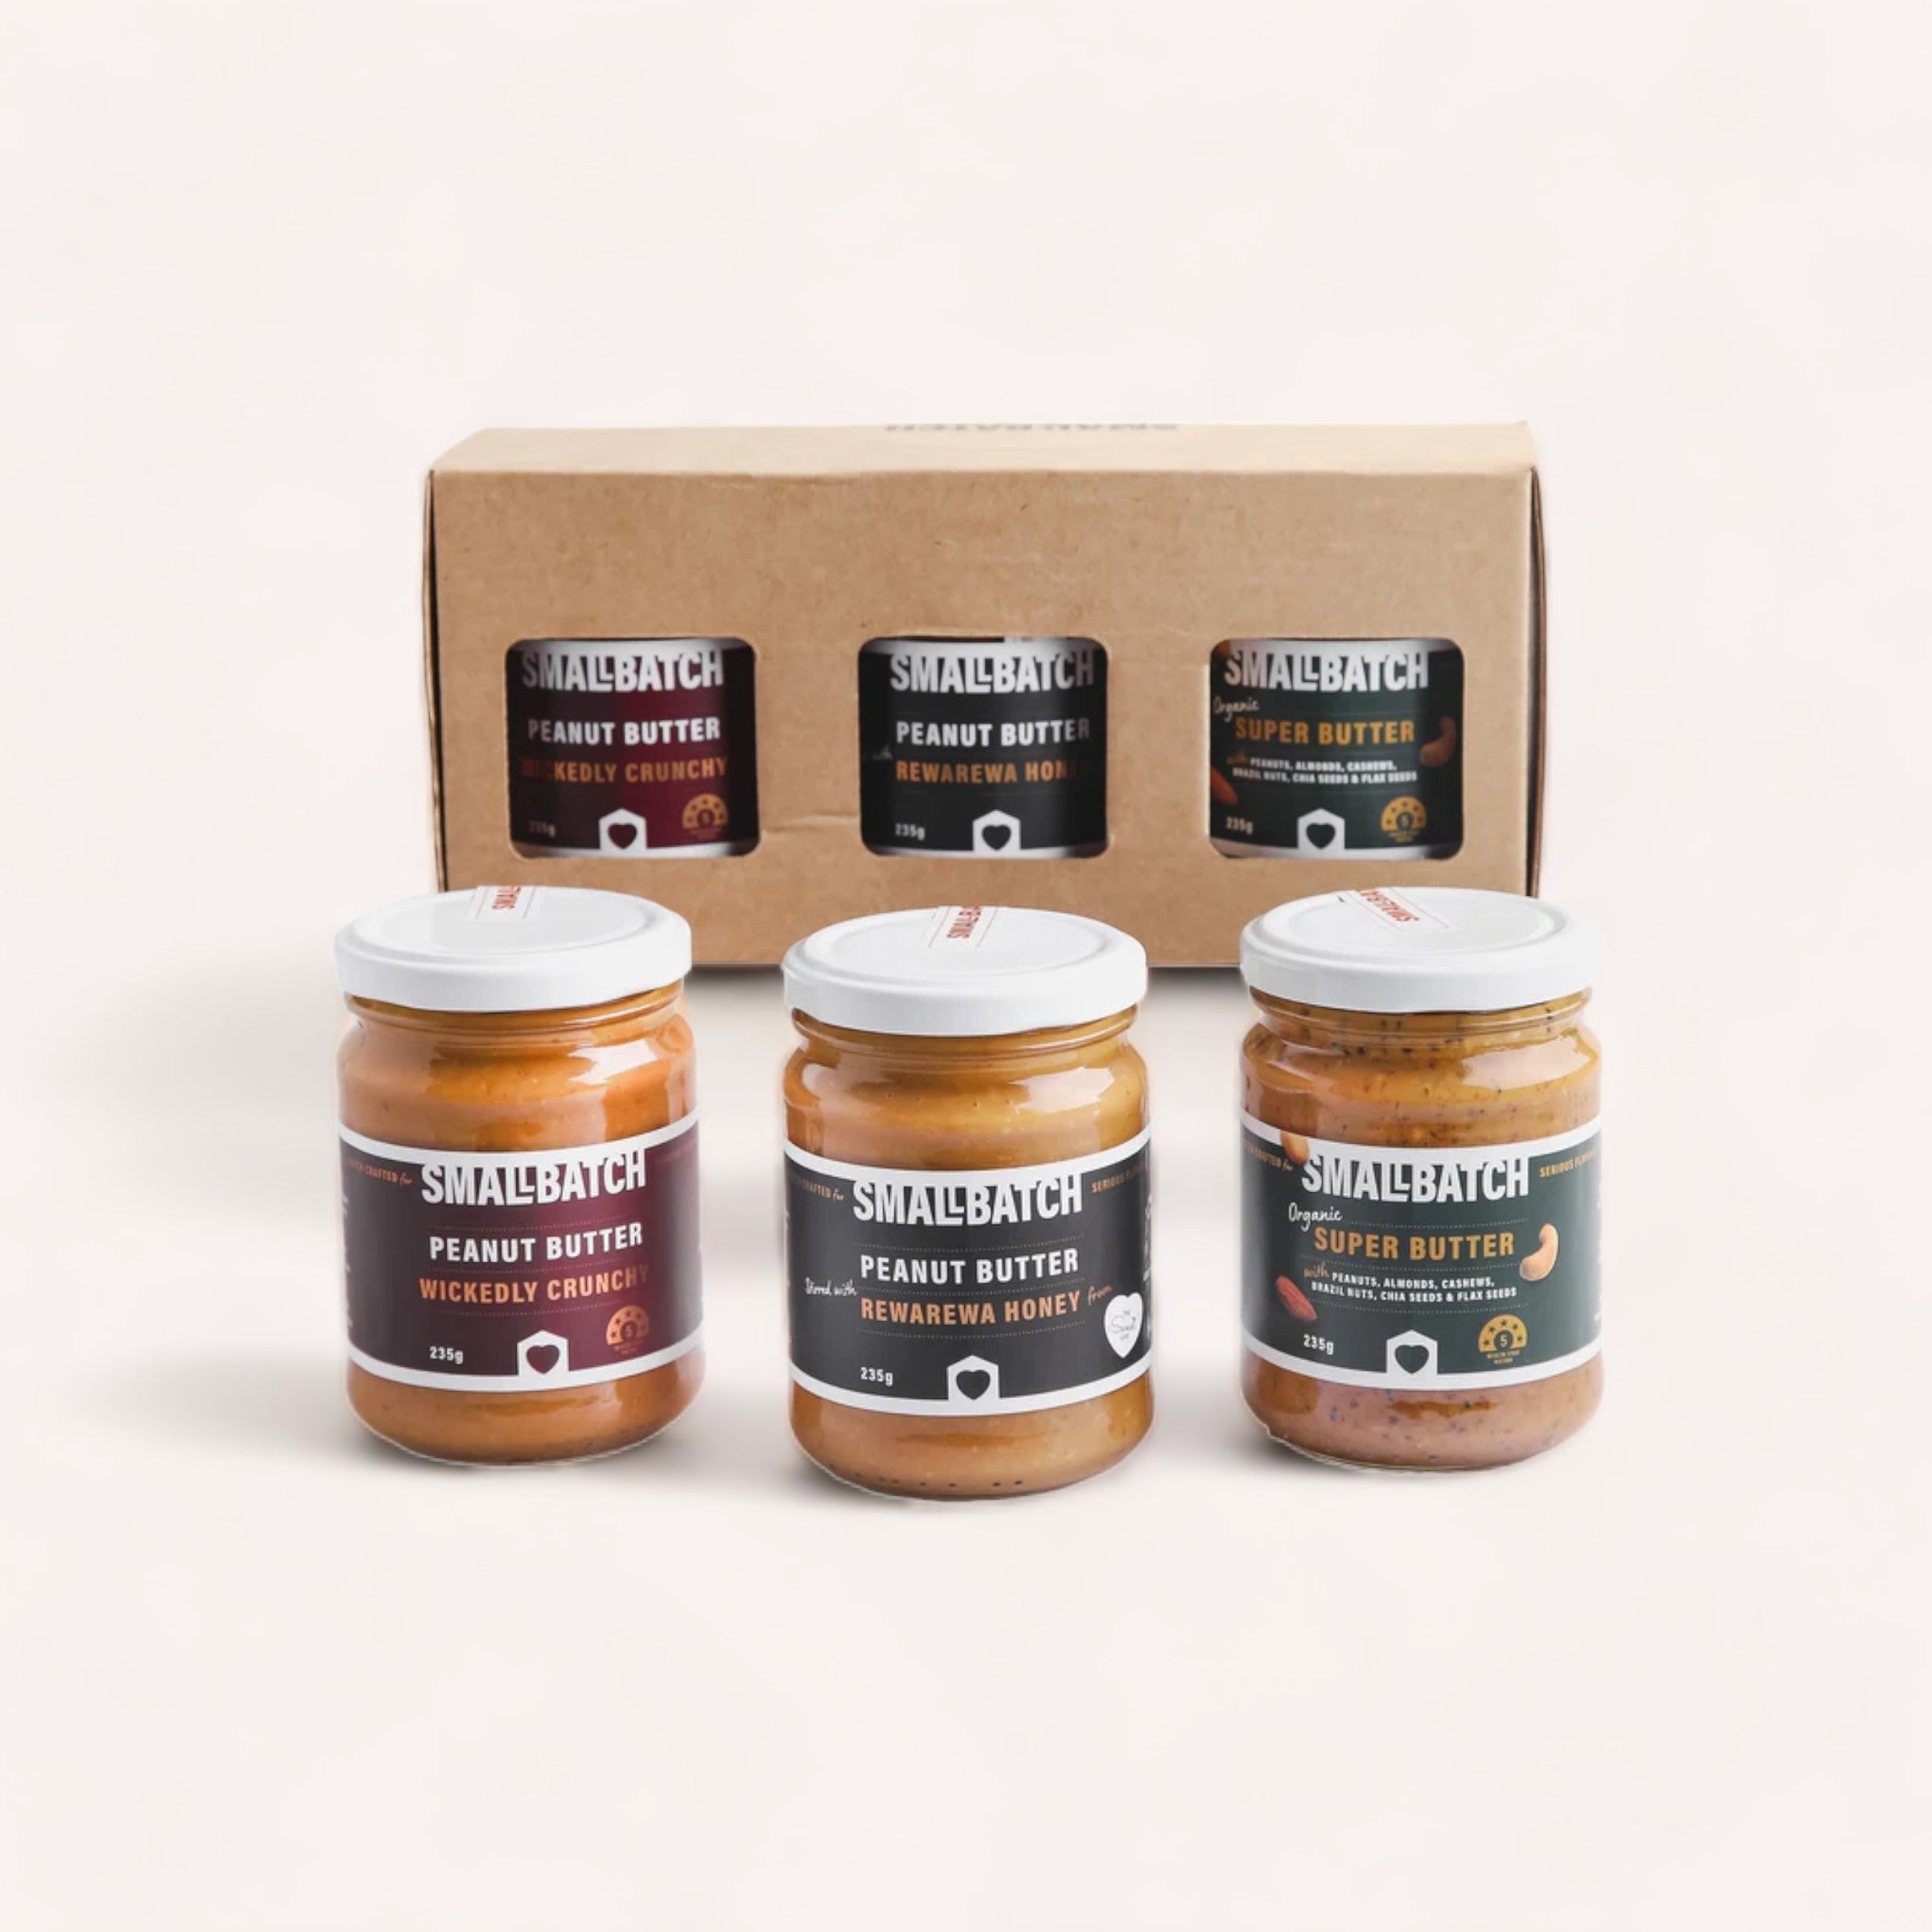 A variety of gourmet Smallbatch Peanut Butter Gift Boxes from New Zealand in front of their brown packaging box, showcasing different textures like smooth, crunchy, and super butter.